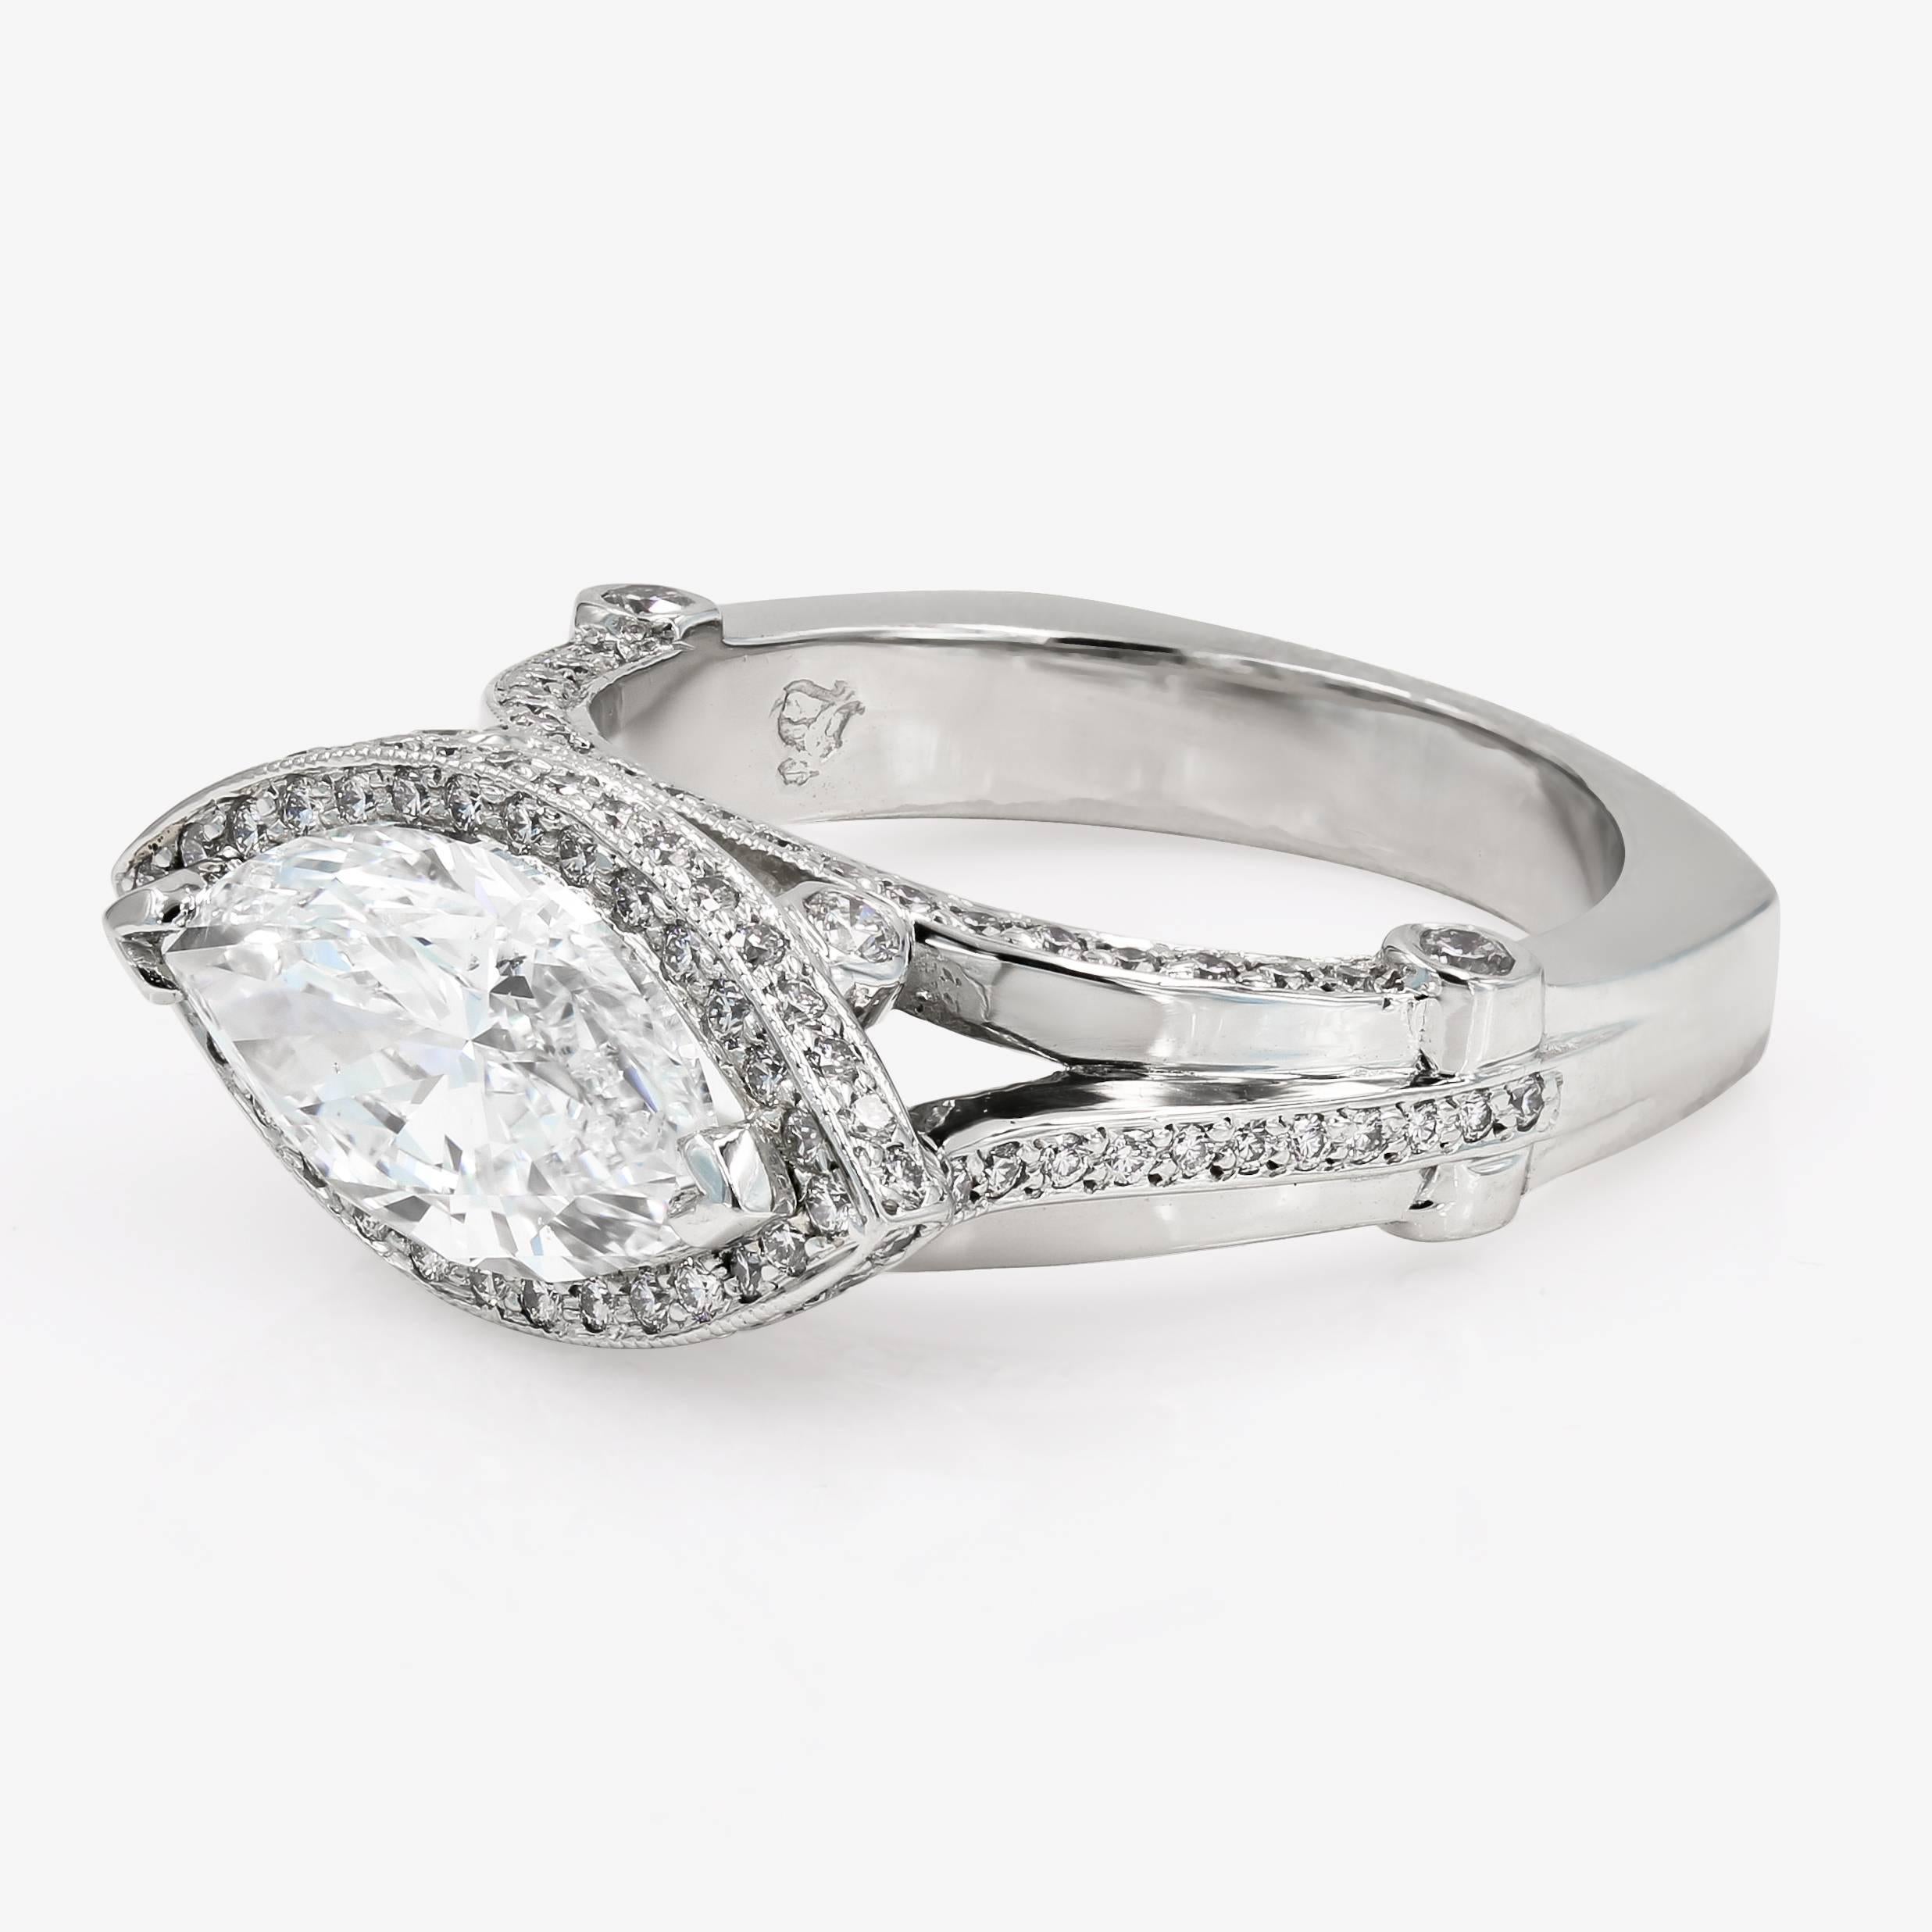 Contemporary GIA Certified 2.54 Carat Marquise Cut Halo Set Diamond Ring